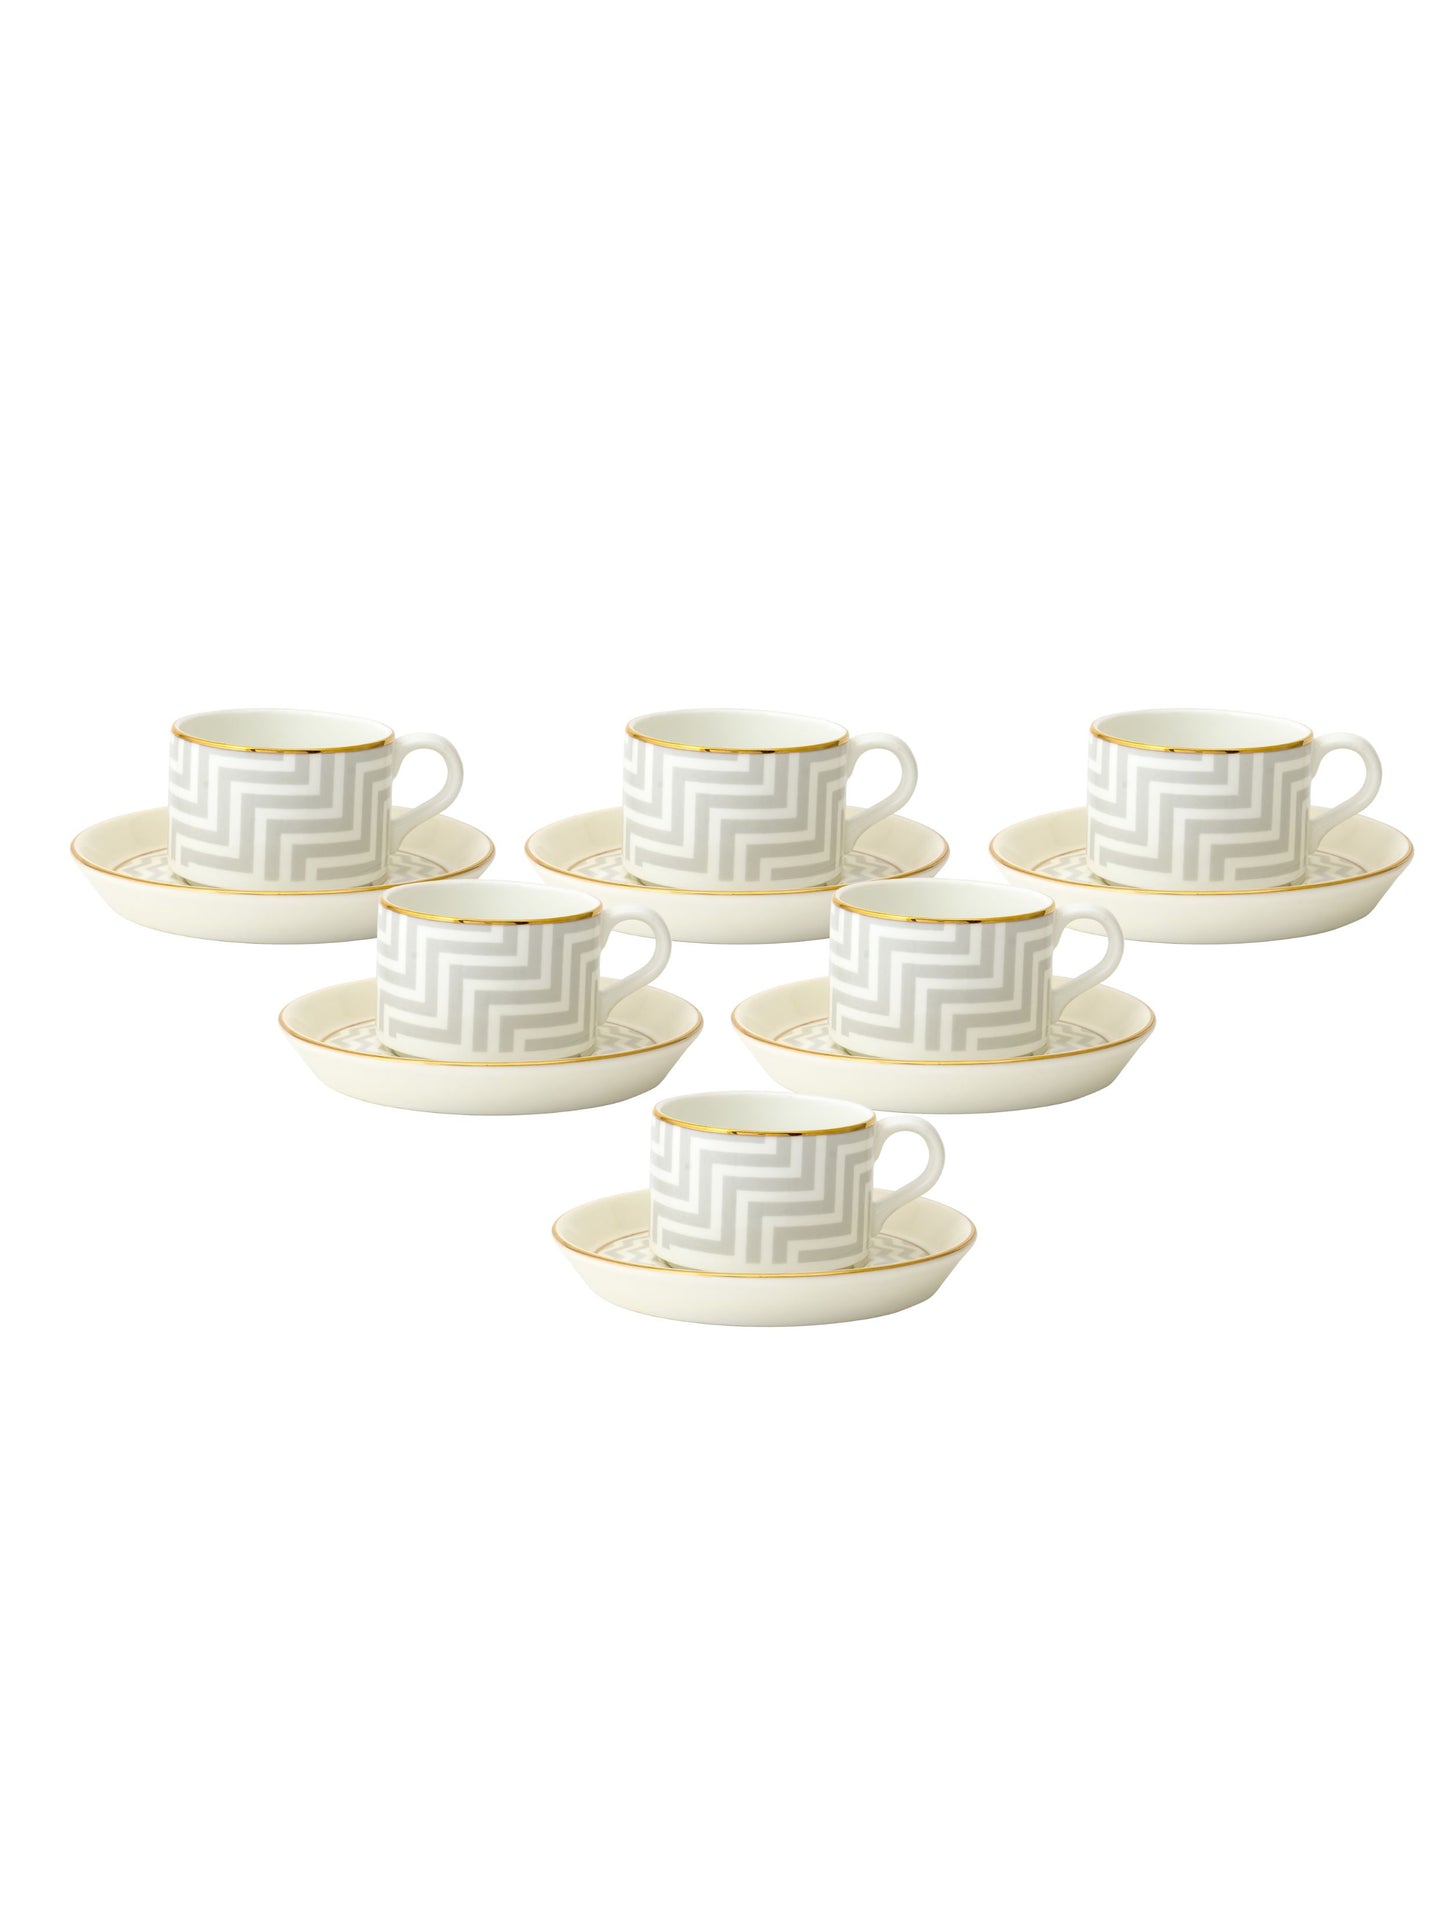 Rio Impression Cup & Saucer, 135 ml, Set of 12 (6 Cups + 6 Saucers) (1203)